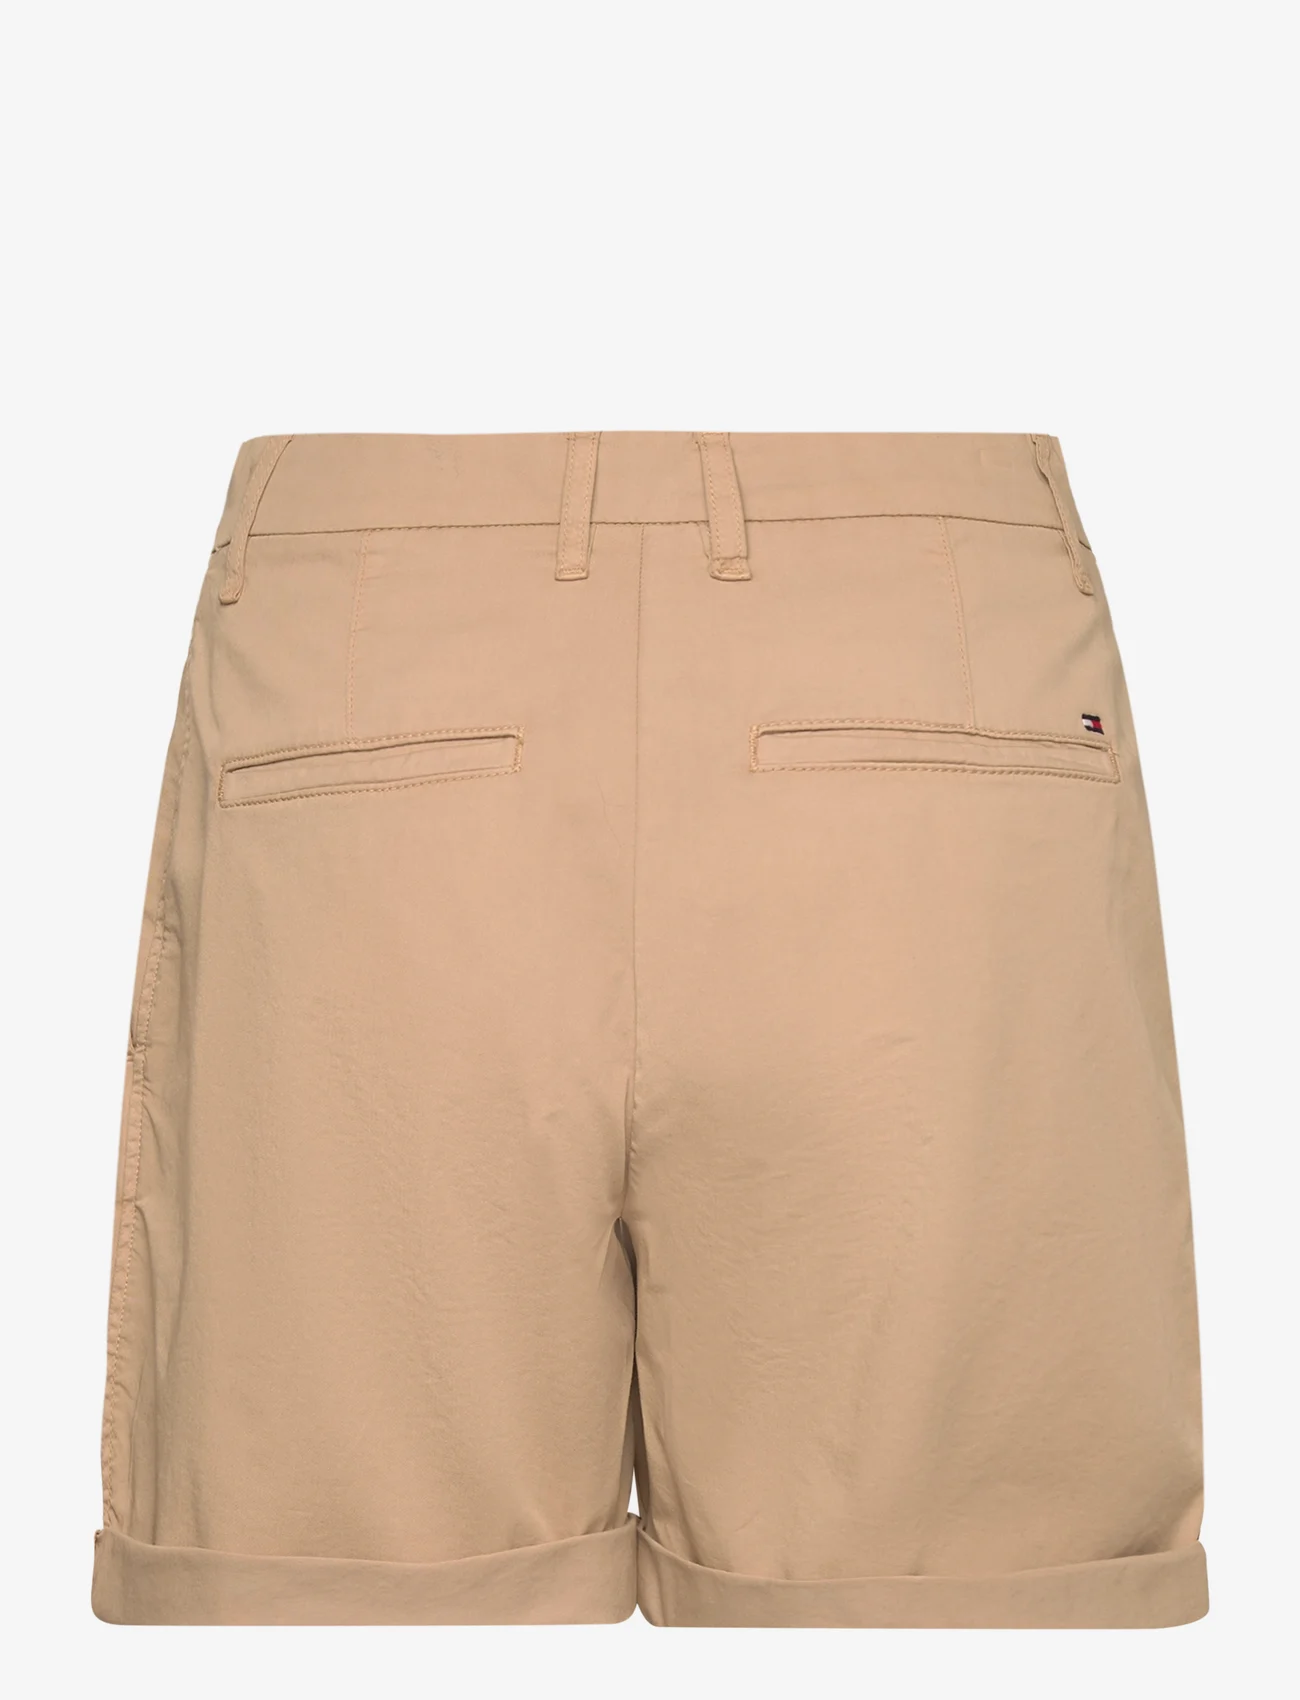 Tommy Hilfiger - CO BLEND GMD CHINO SHORT - chino-shorts - beige - 1